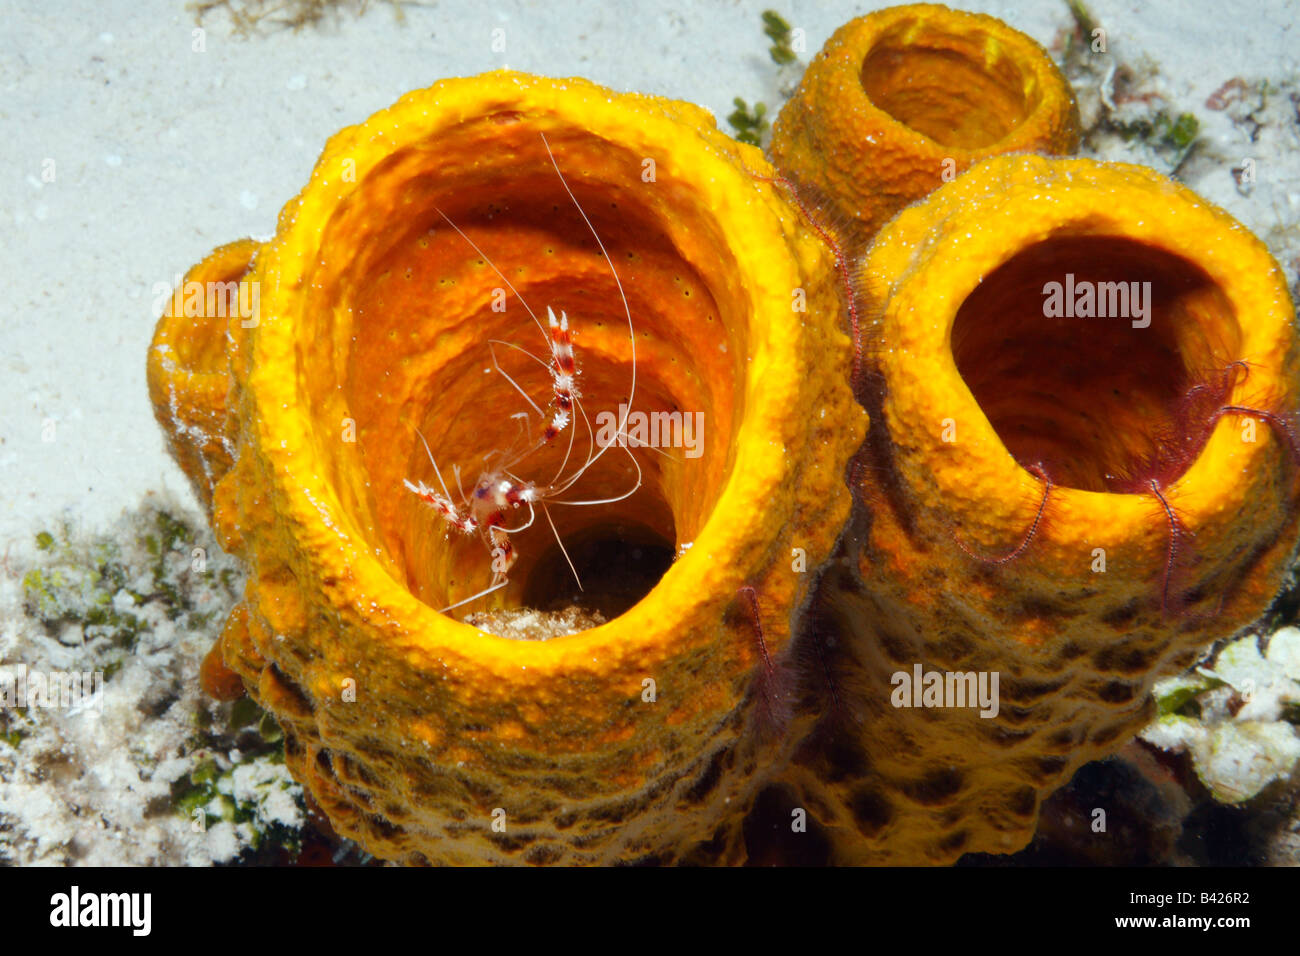 Banded Coral Shrimp and Sponge Brittle Starshare their habitat in a Brown Clustered Tube Sponge Stock Photo